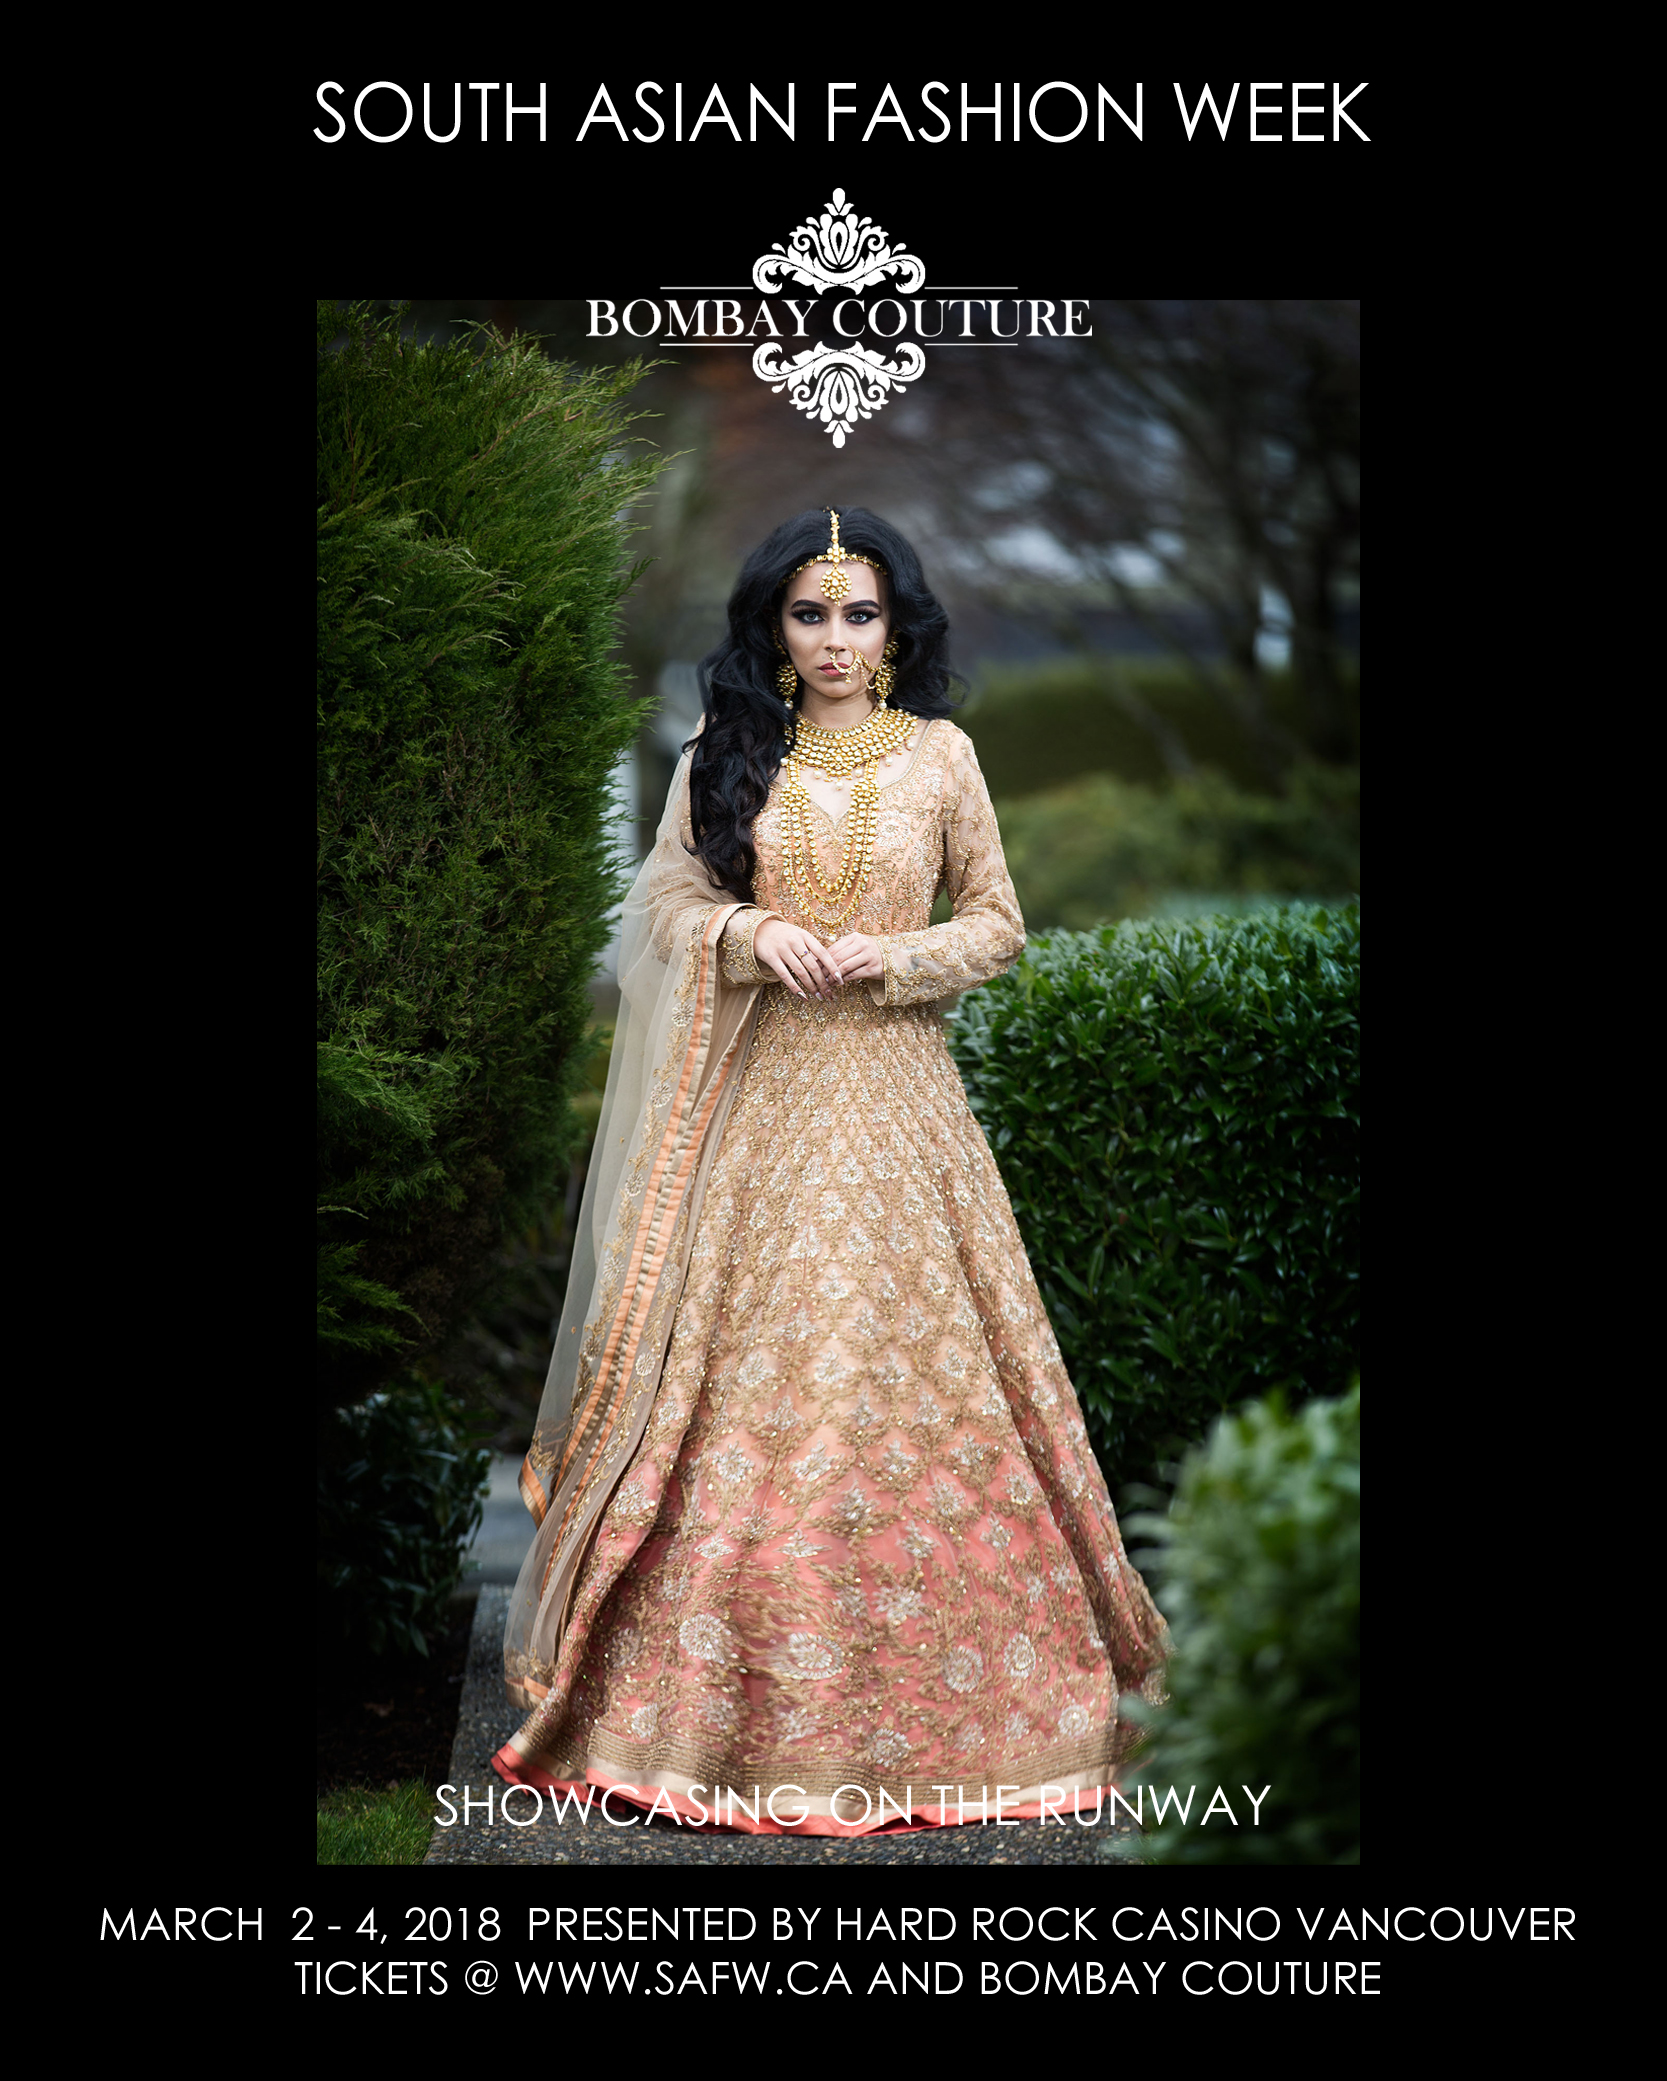 Bombay Couture